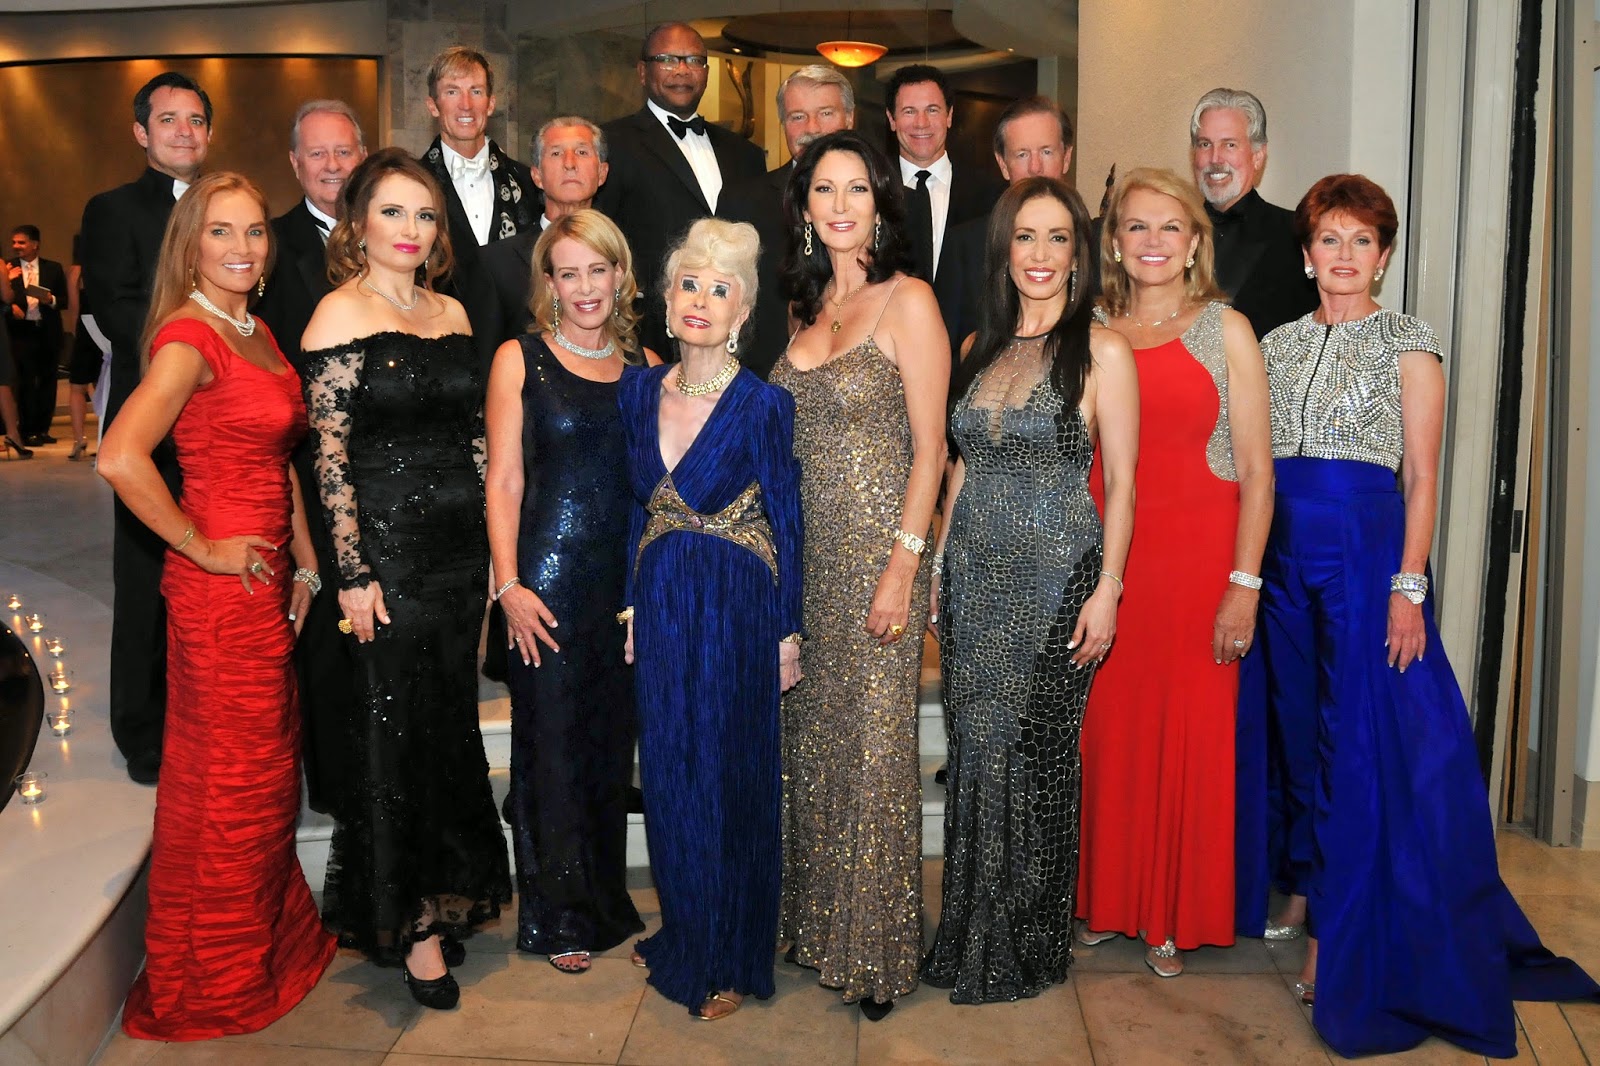 DRESS FOR SUCCESS: 7TH ANNUAL“10 BEST DRESSED” GALA ~ ArtsNFashion